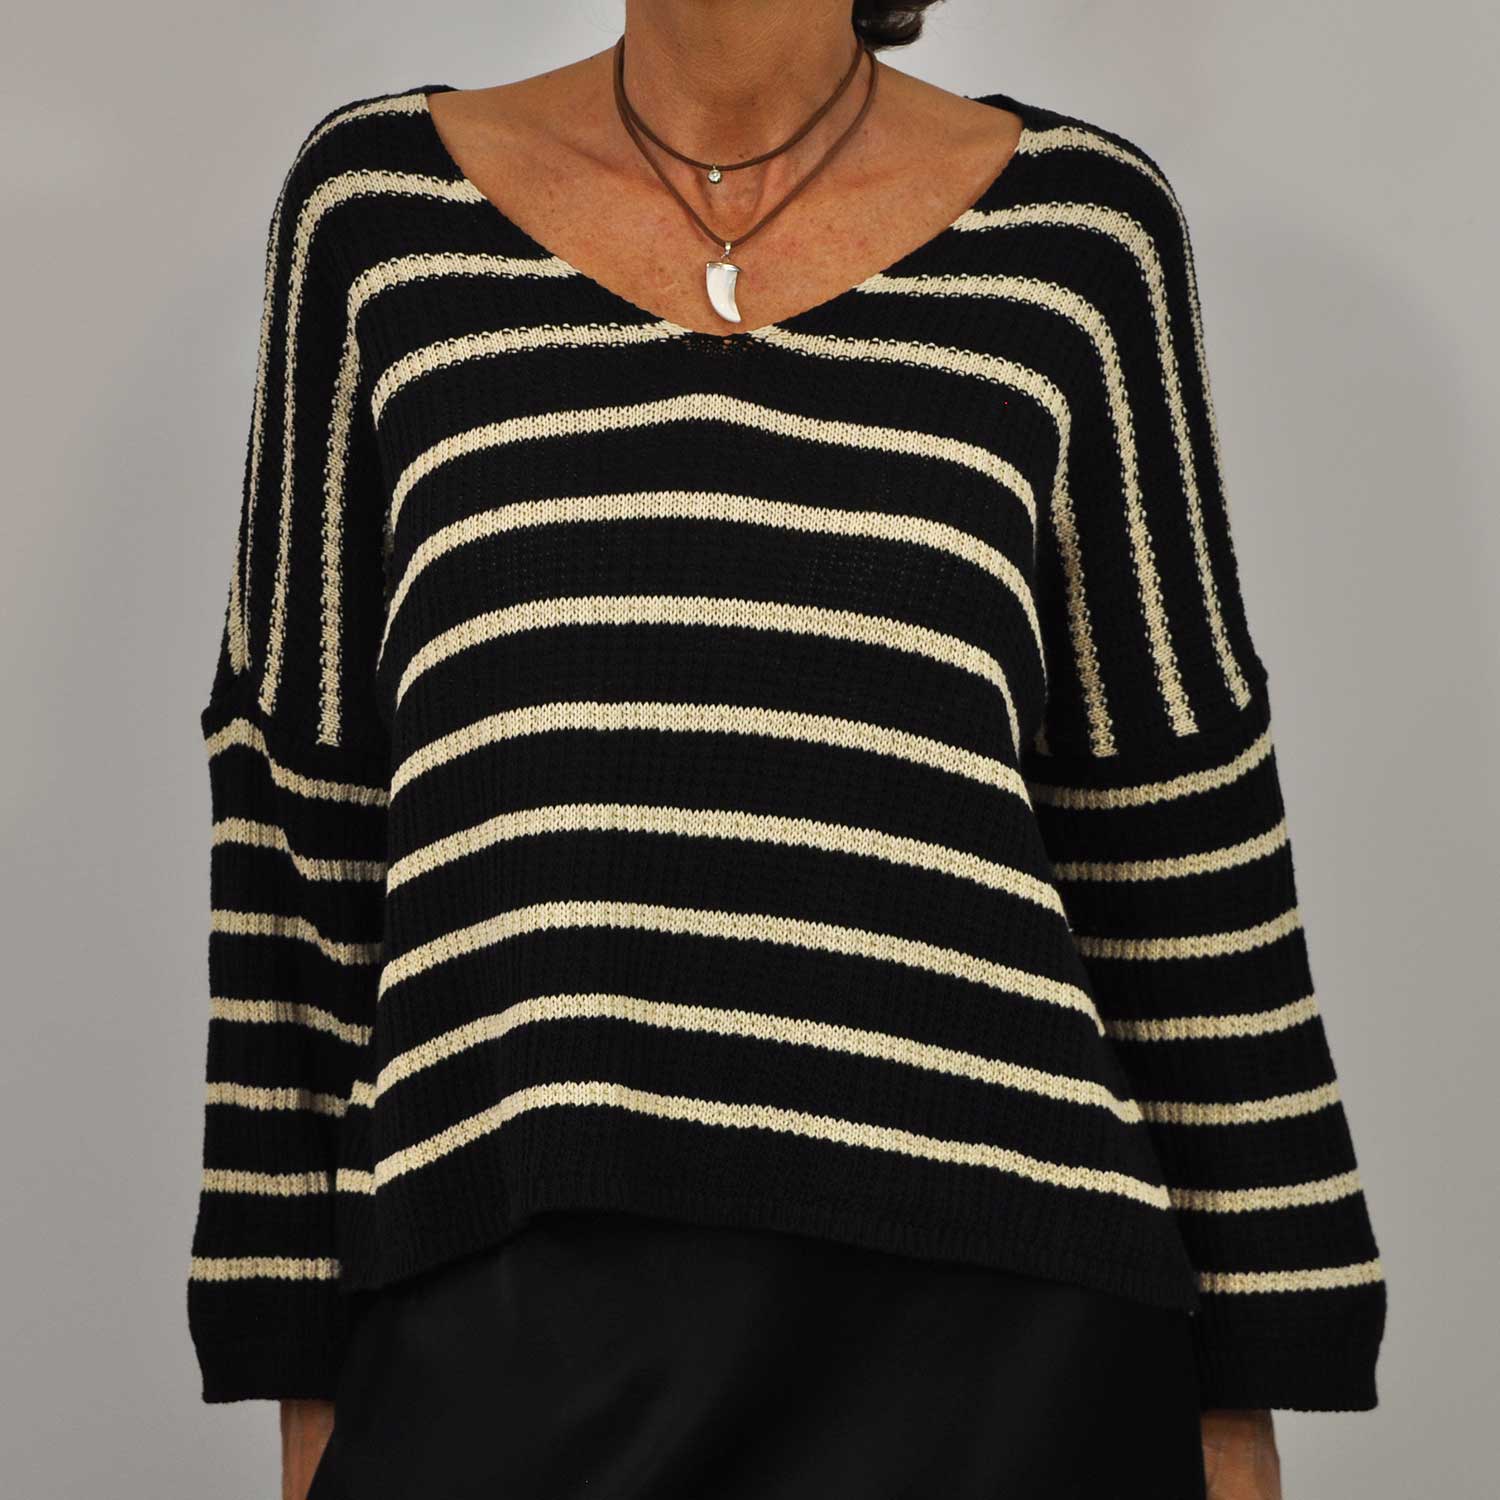 Black striped knitted sweater